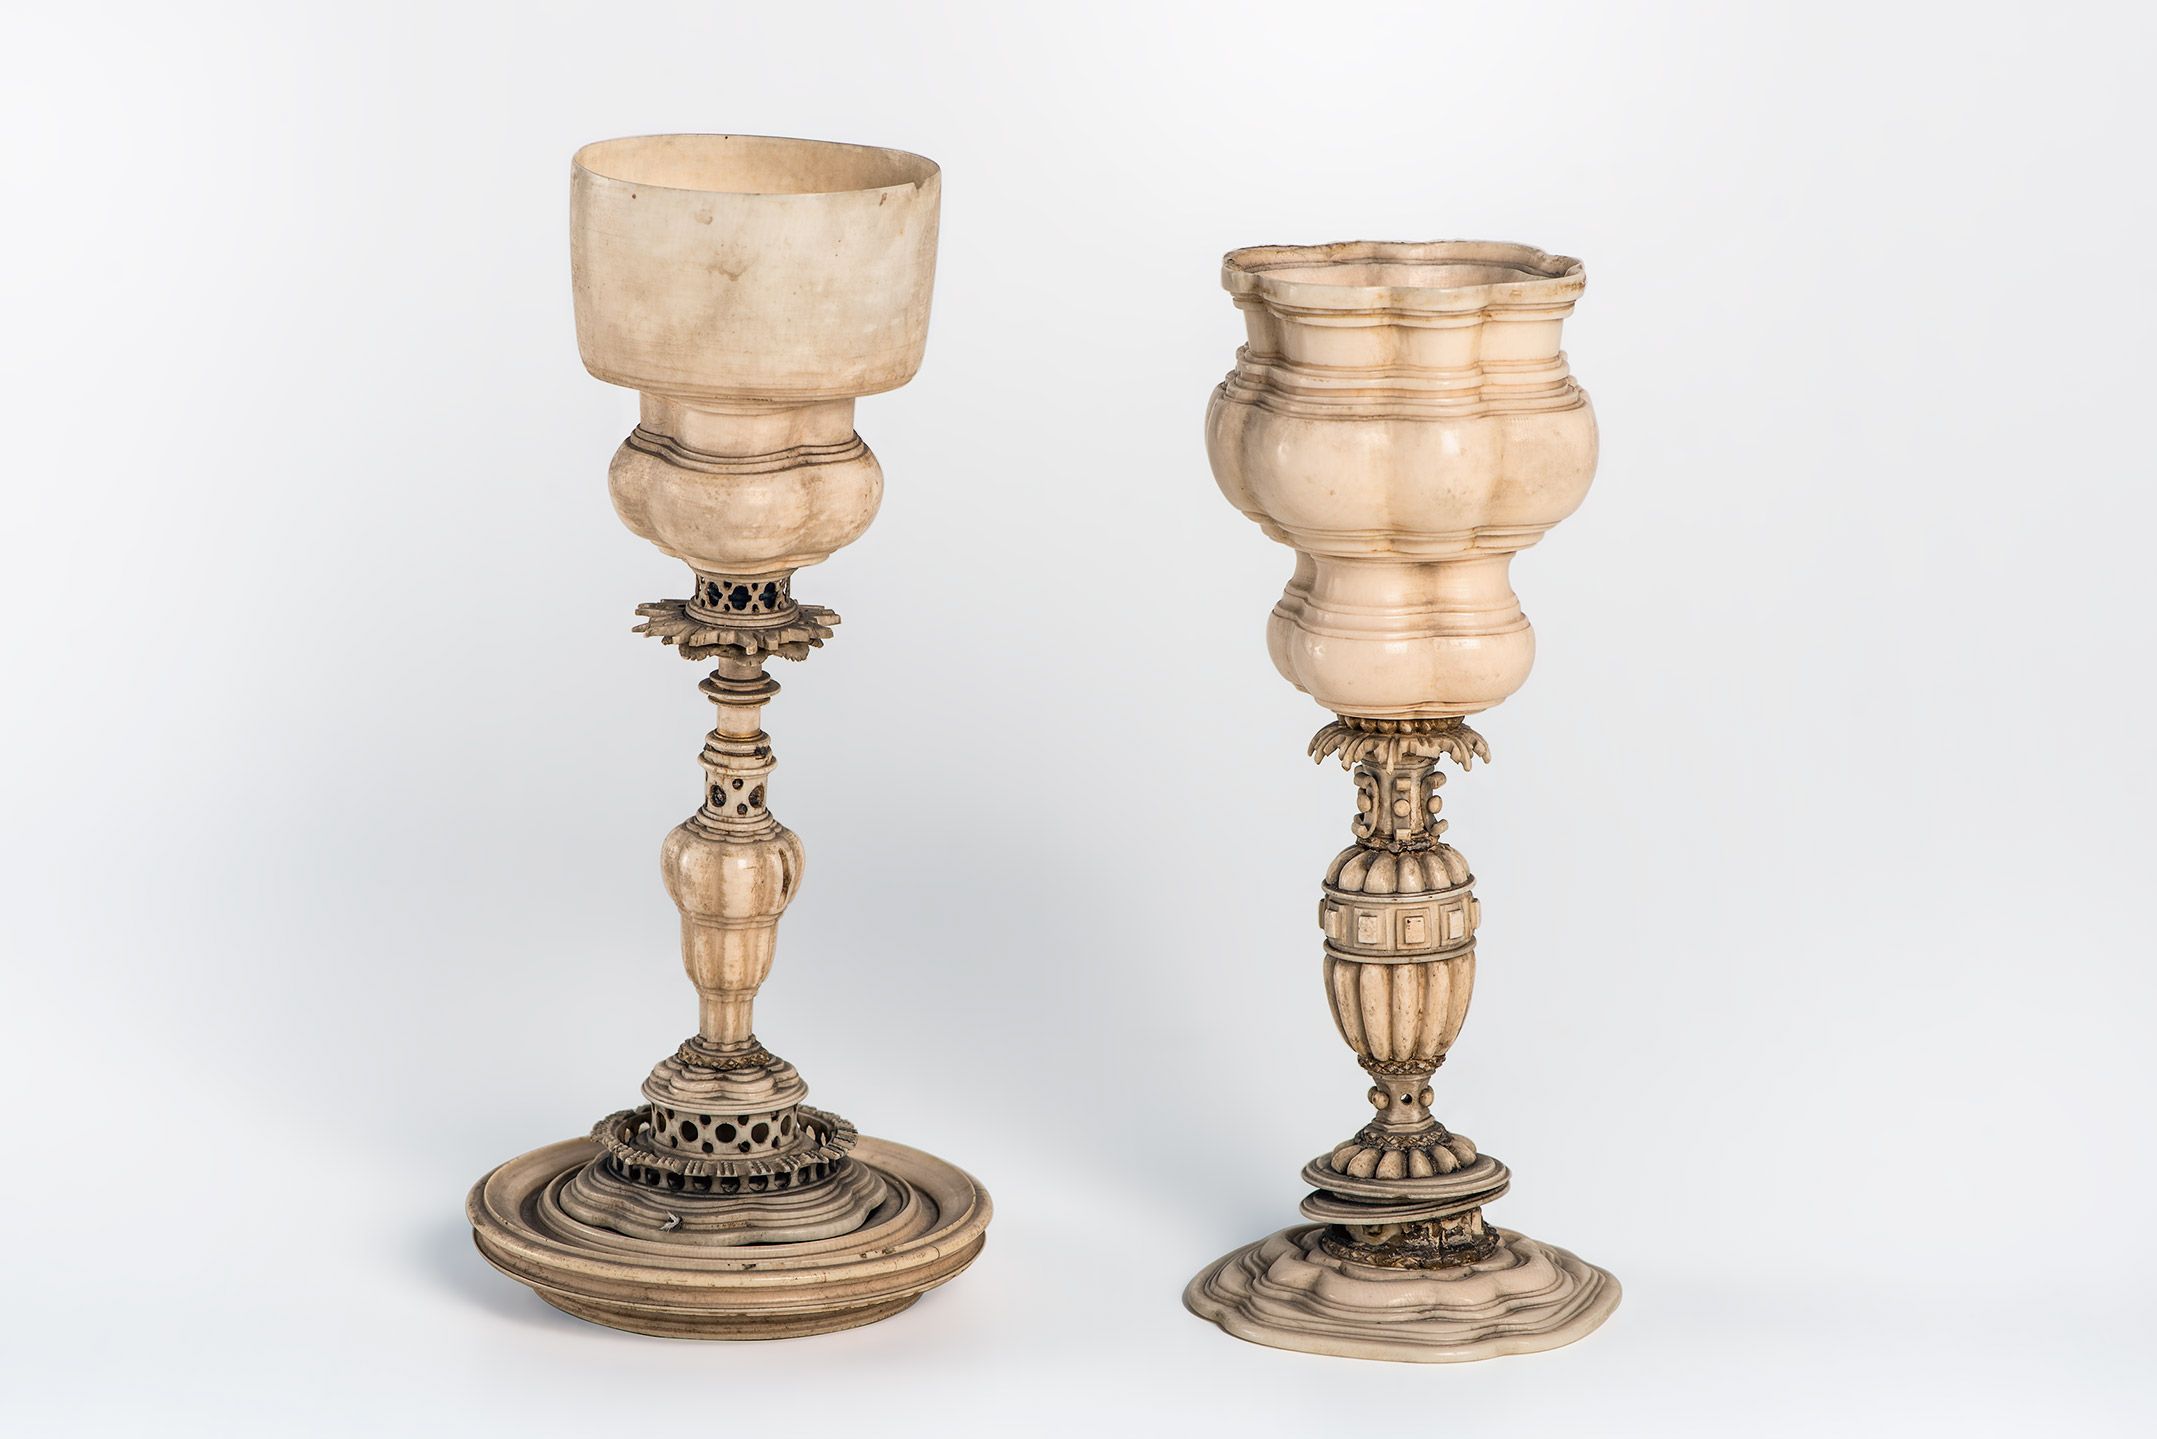 Turned chalices